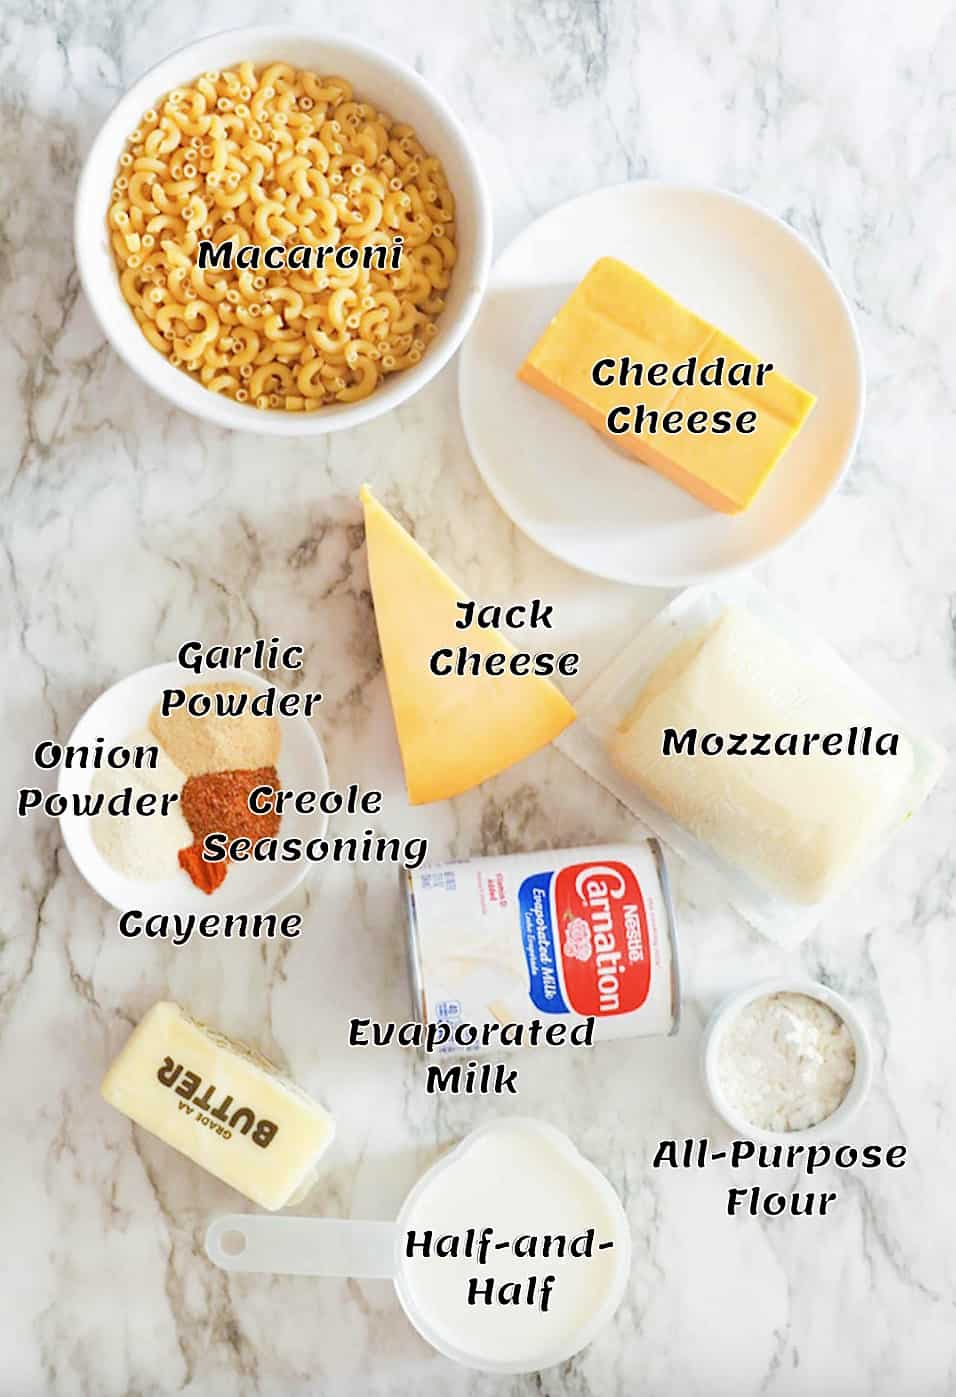 https://www.africanbites.com/wp-content/uploads/2023/03/Southern-Mac-and-Cheese-Ingredients.jpg